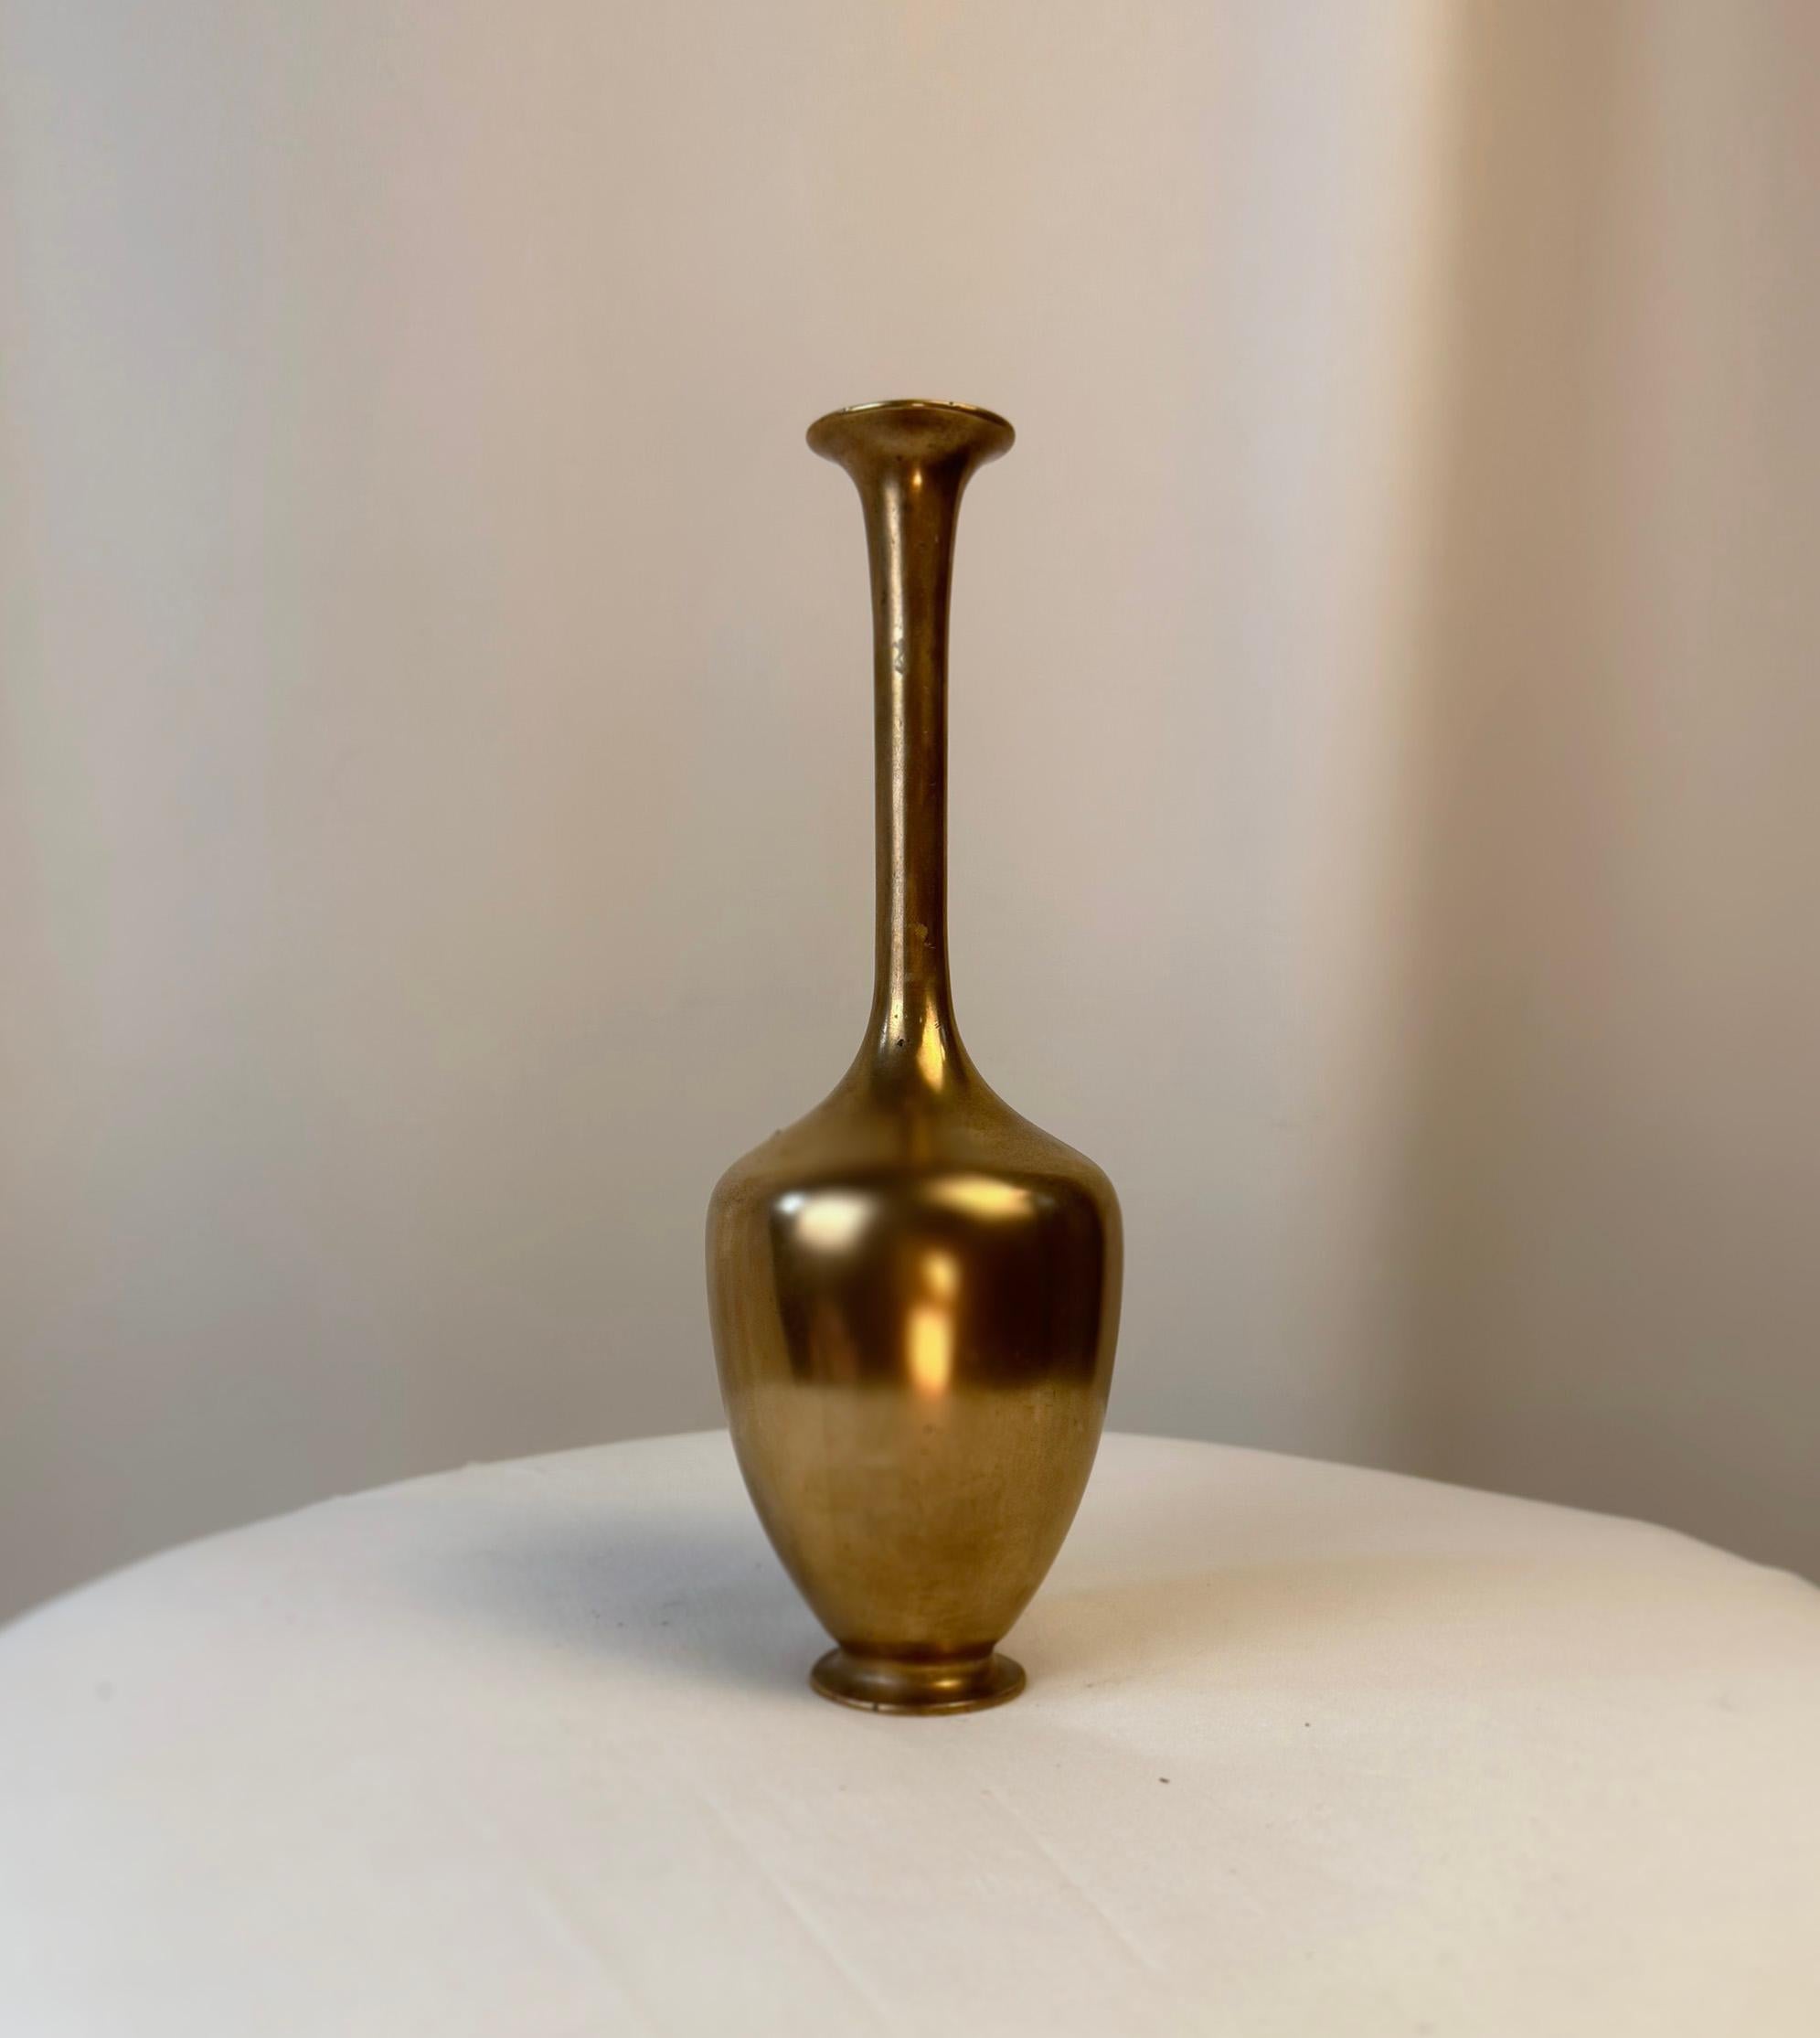 Japanese copper bud vase, created by the renowned artisan Genryusai Seiya.

This exquisite vase is a testament to the refined craftsmanship of the Meiji era, a period known for its artistic flourishing in Japan. Crafted from copper, this diminutive